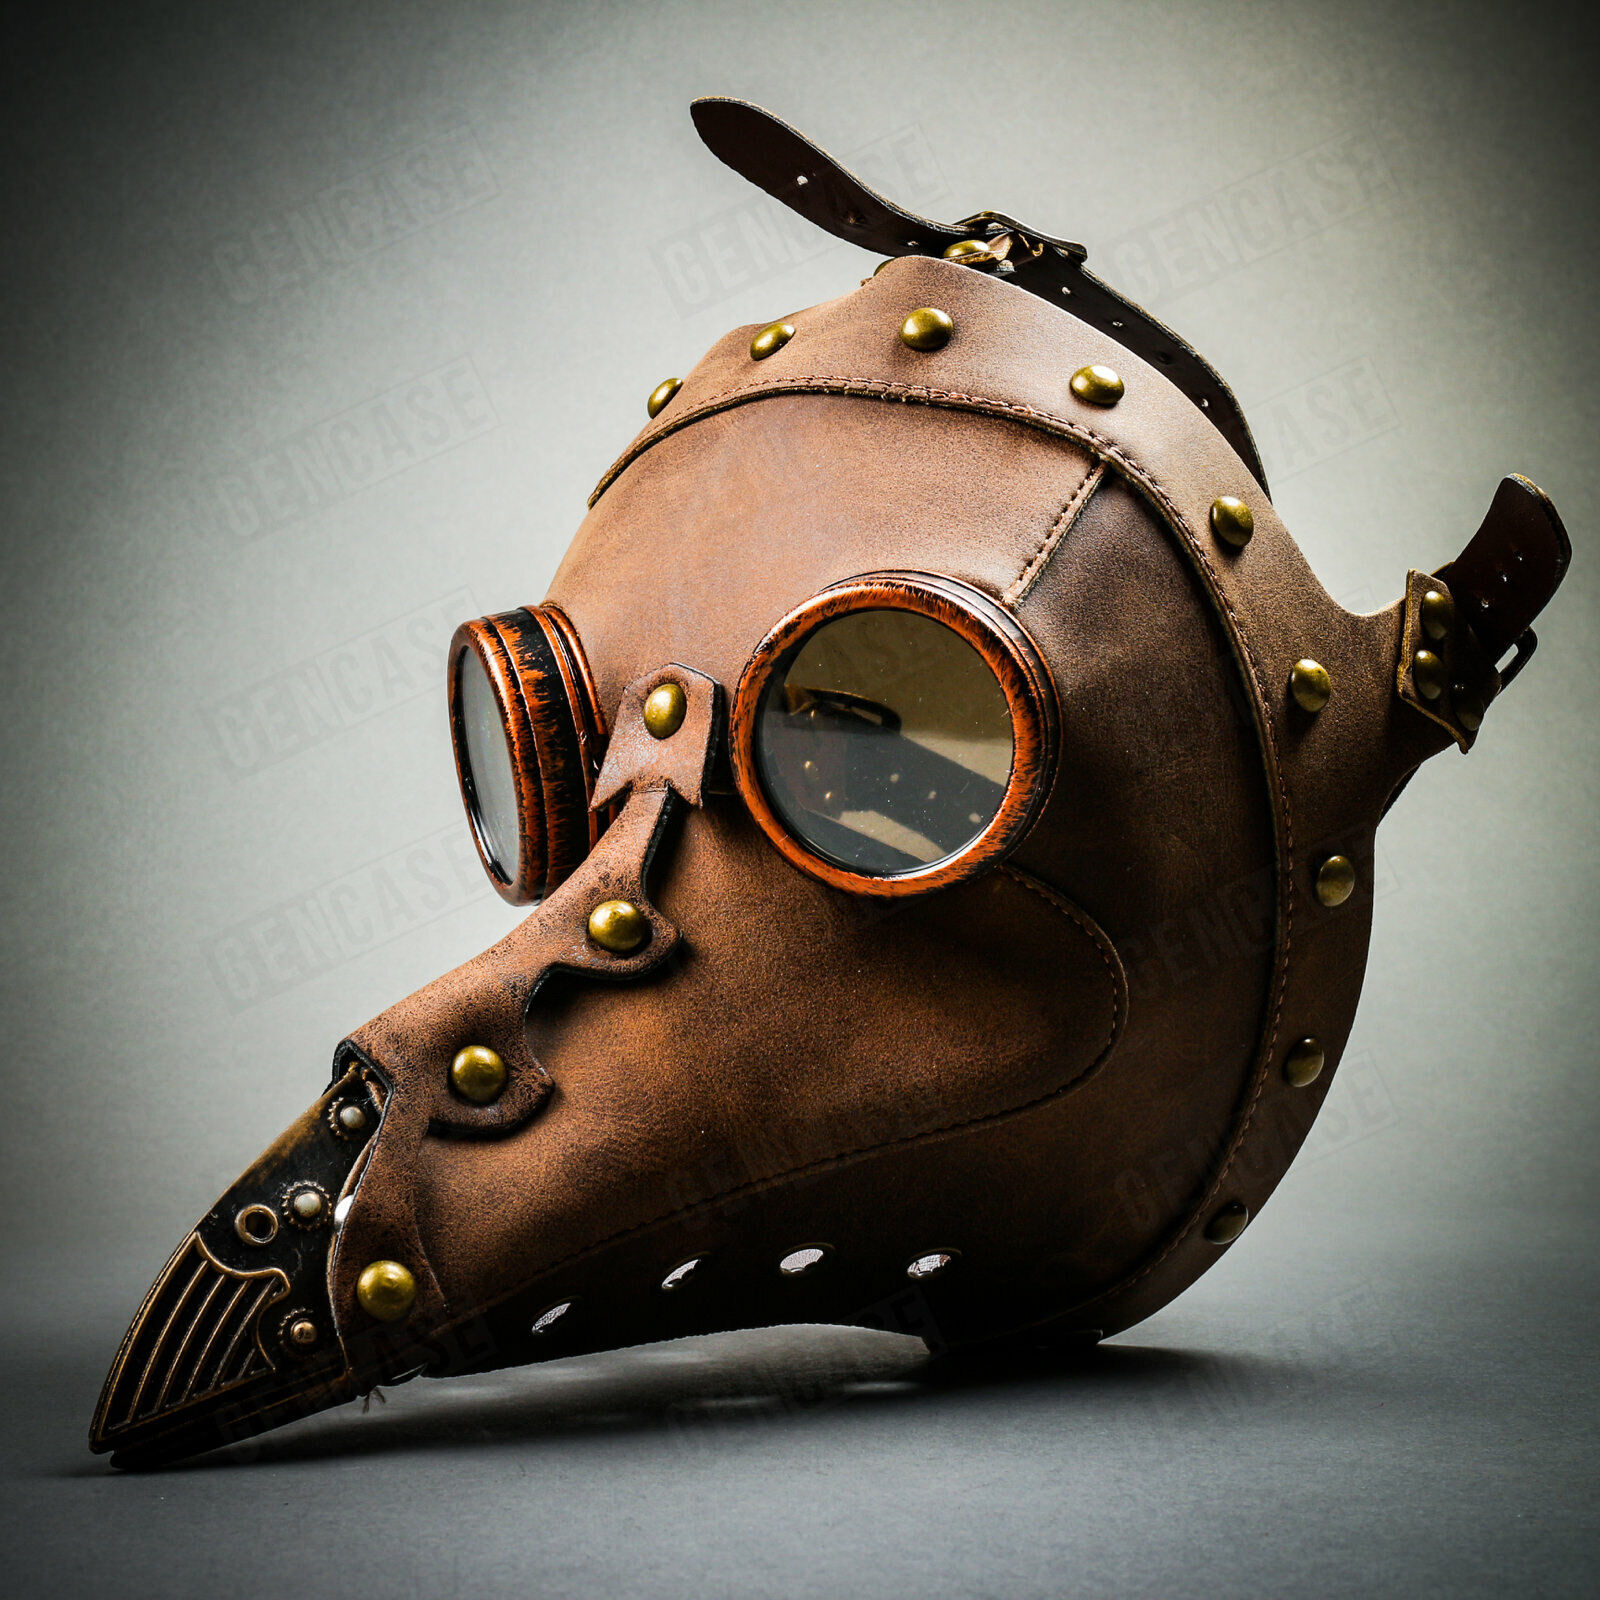 NEW Leather Steampunk Plague Doctor Mask Long Nose Mask Halloween Party Costume